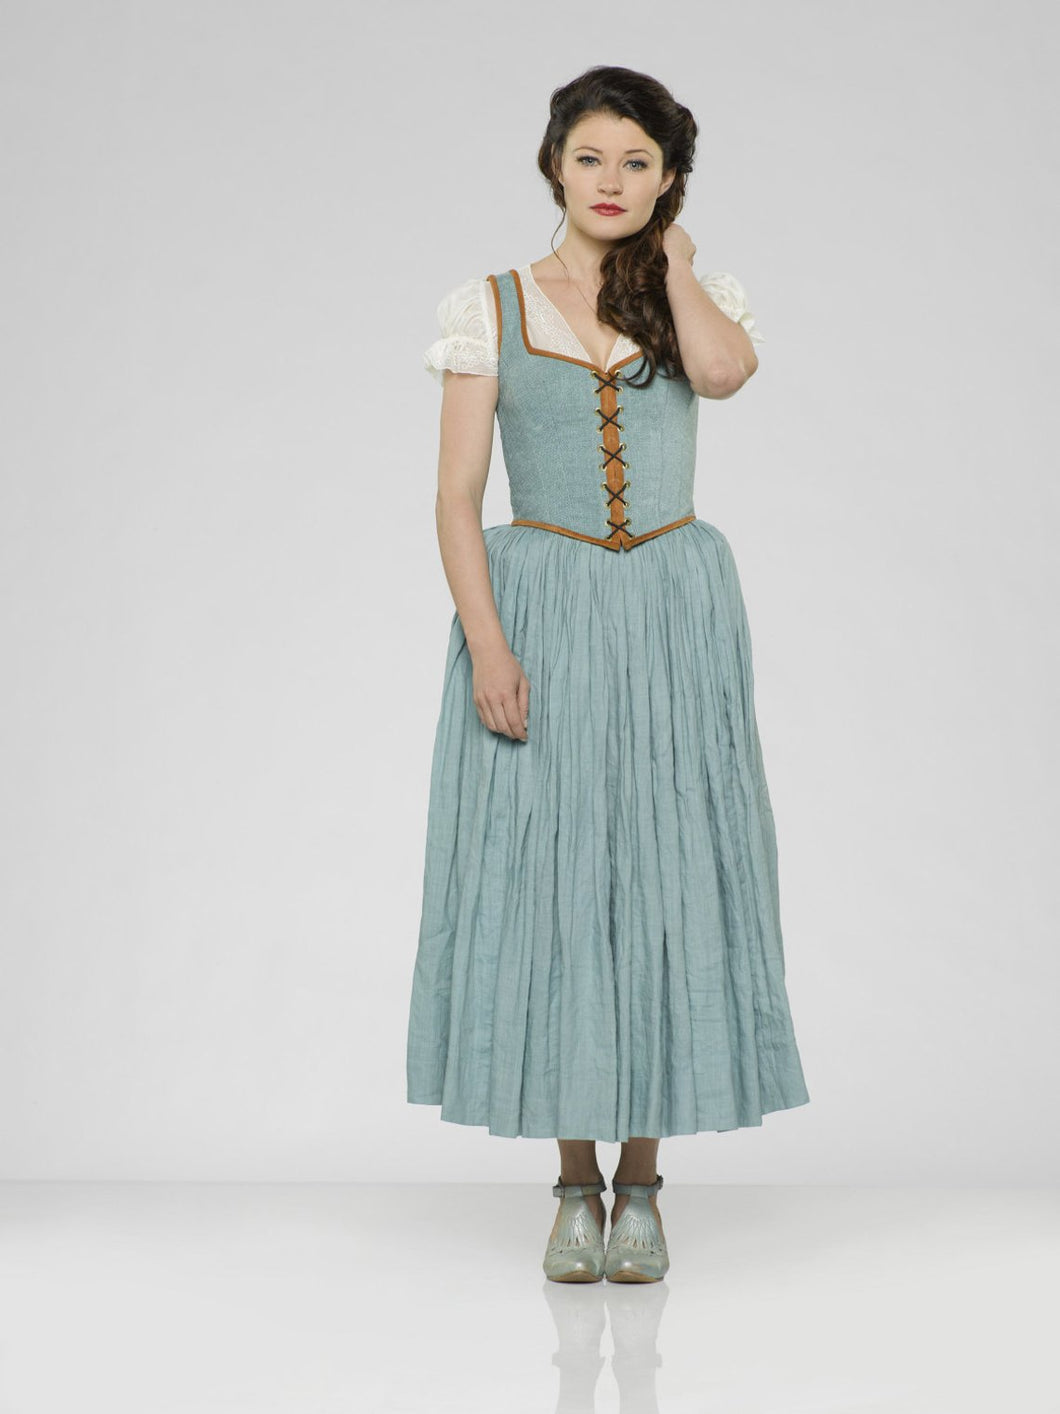 Belle once upon a time costume